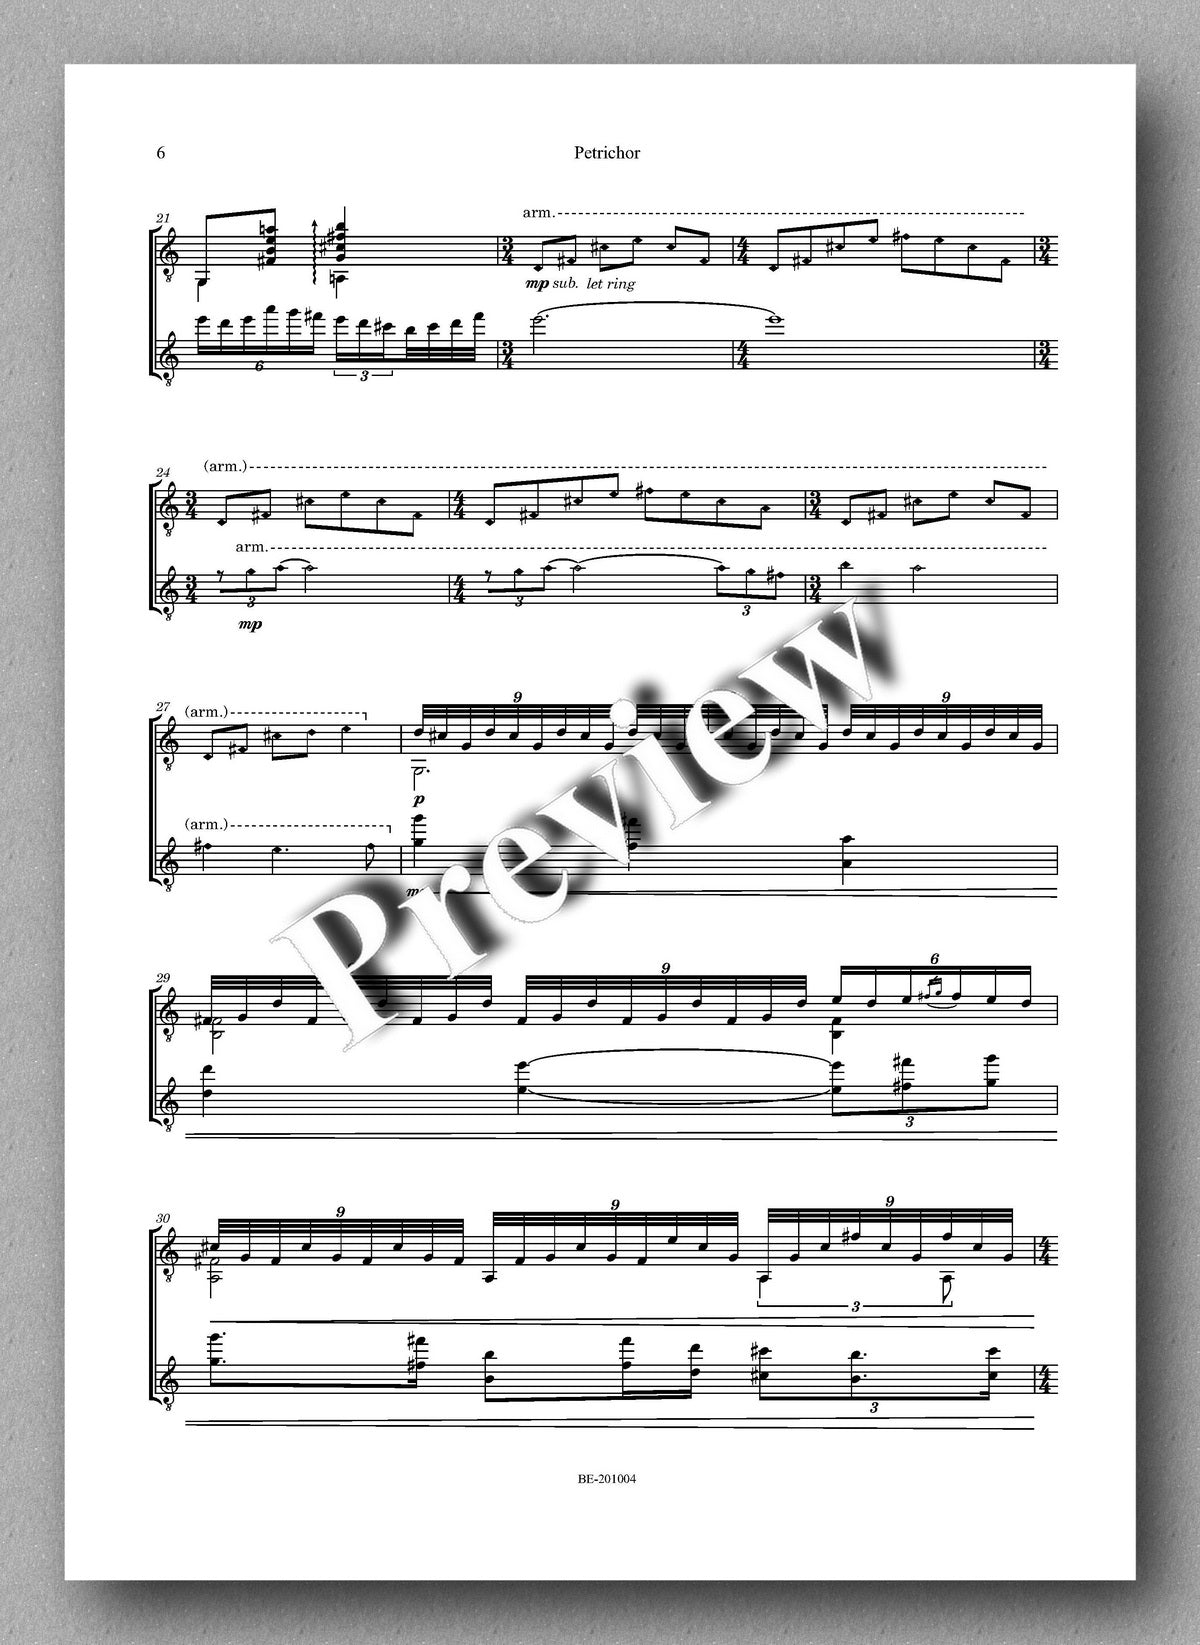 Petrichor by Michael Kim-Sheng - preview of the music score 3